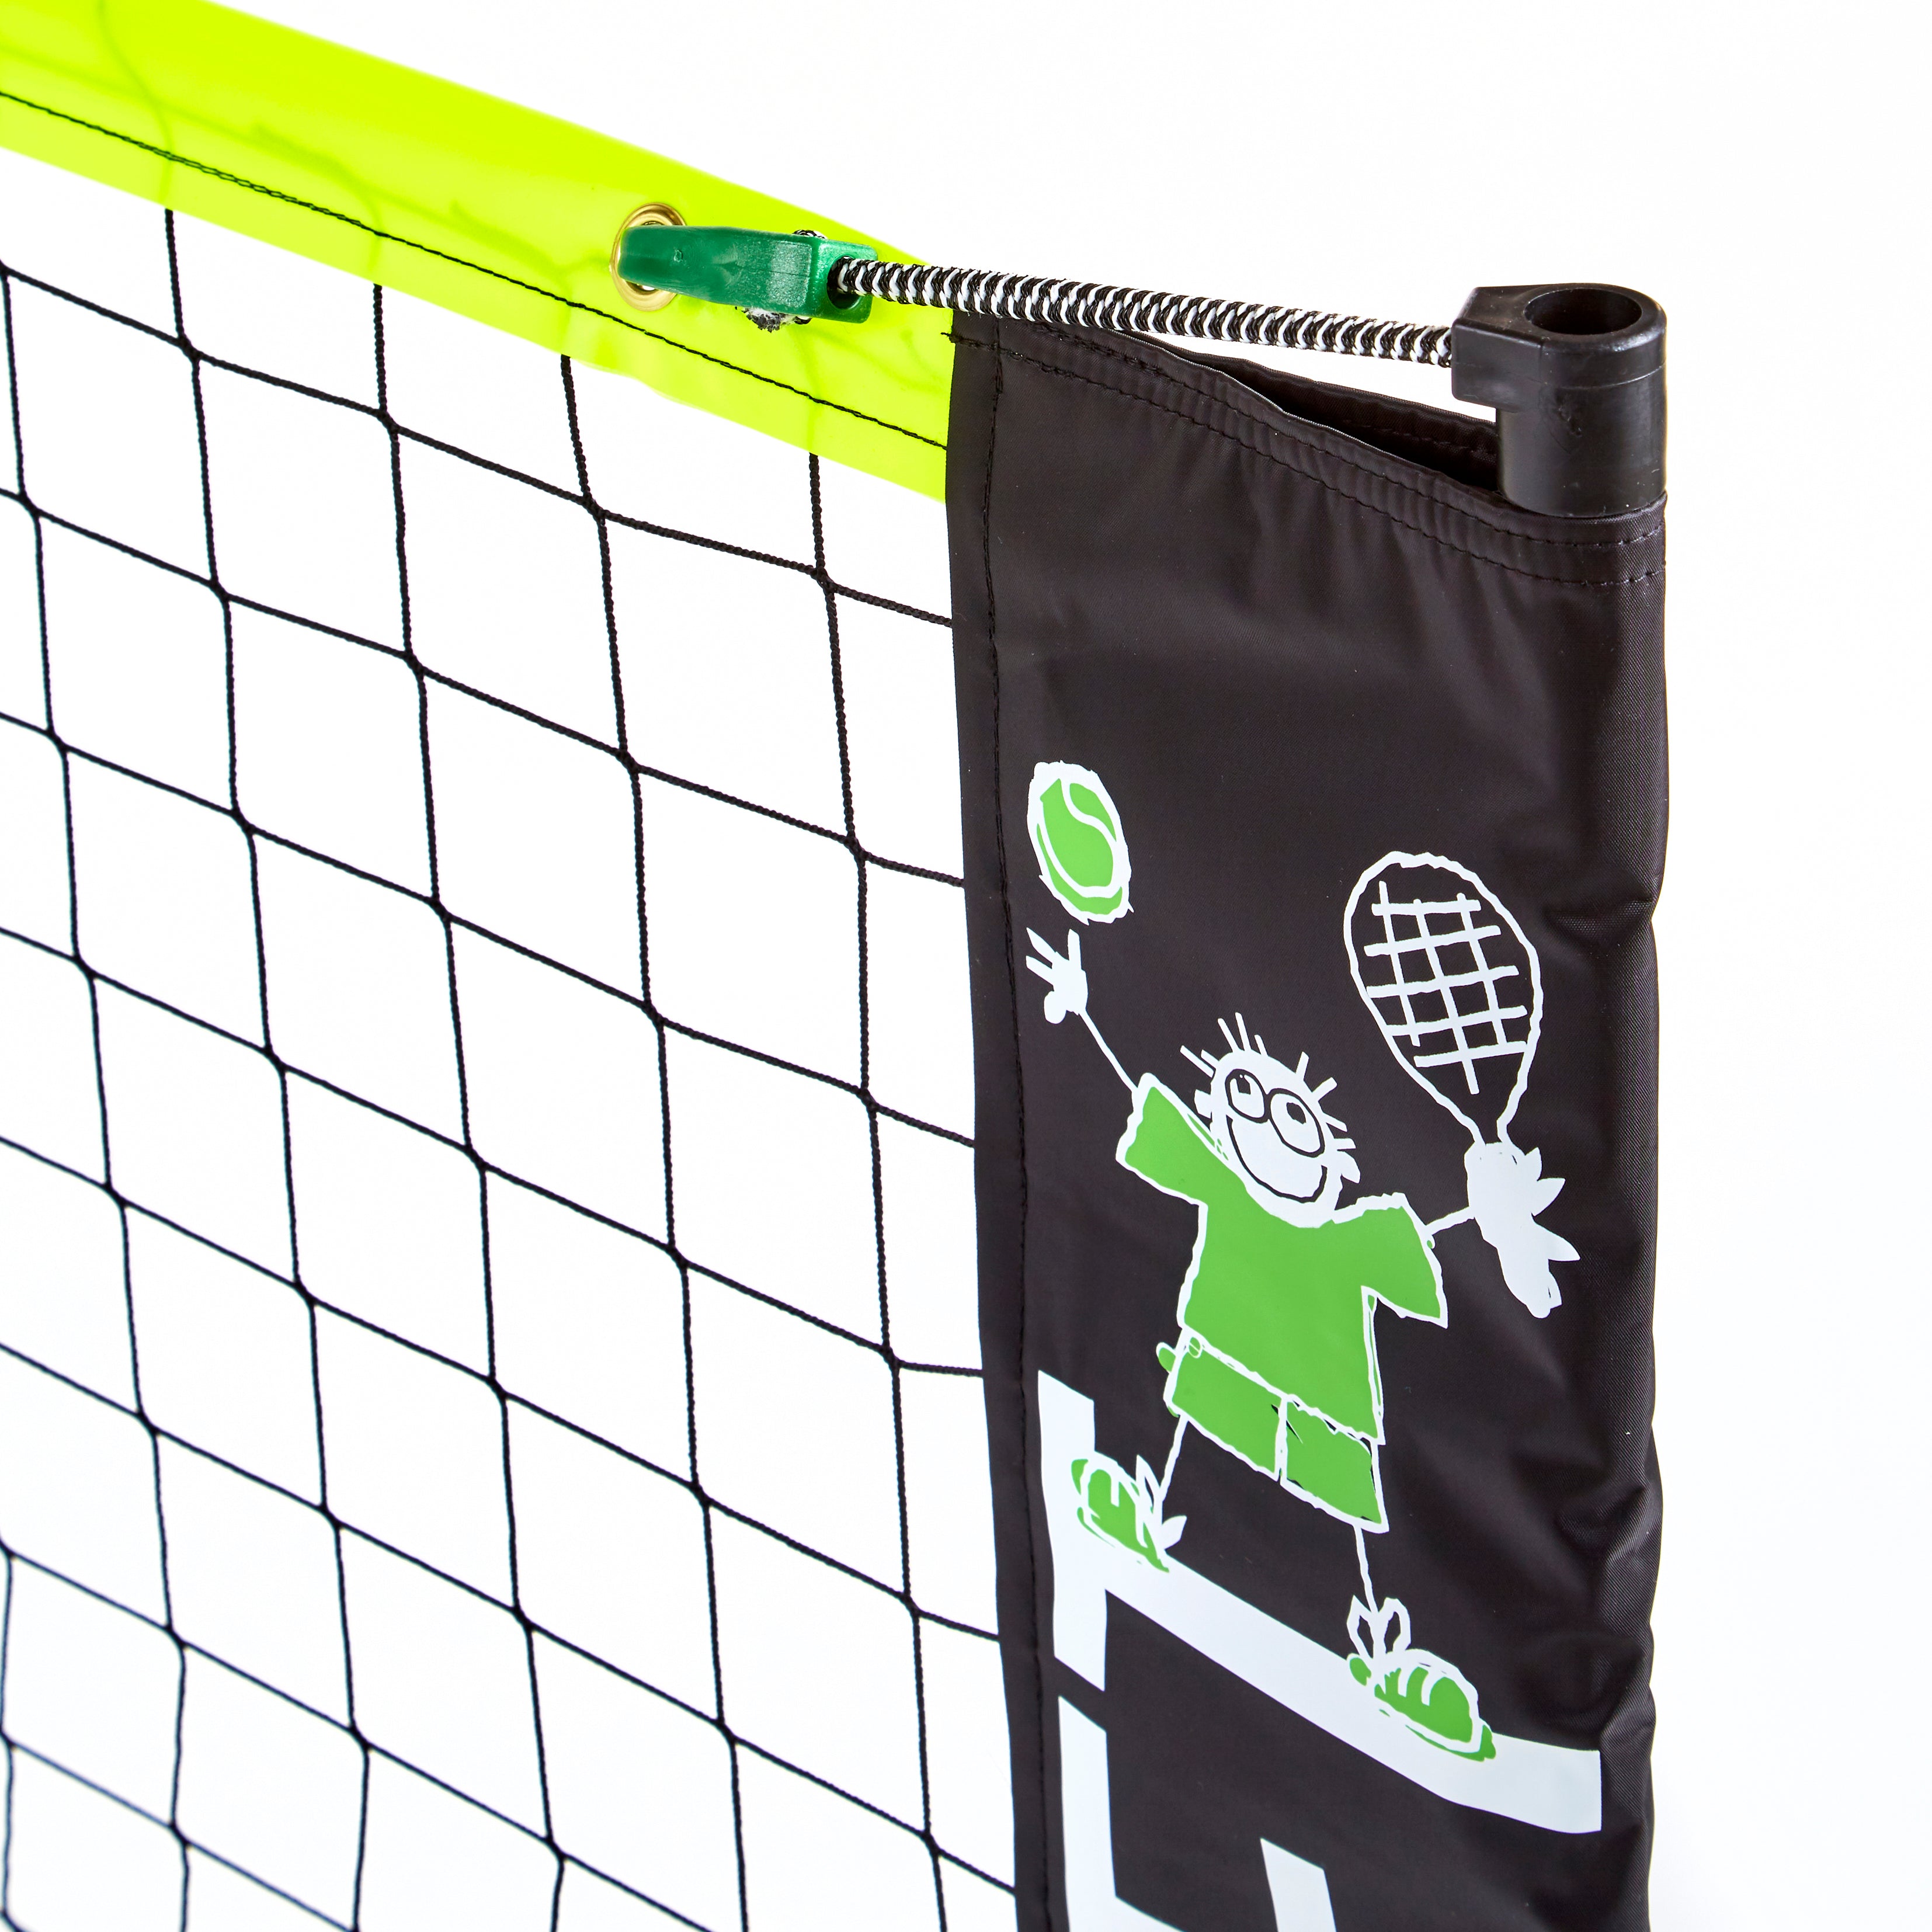 Zsig 6m Classic Mini tennis Net clip and bungee tensioning system